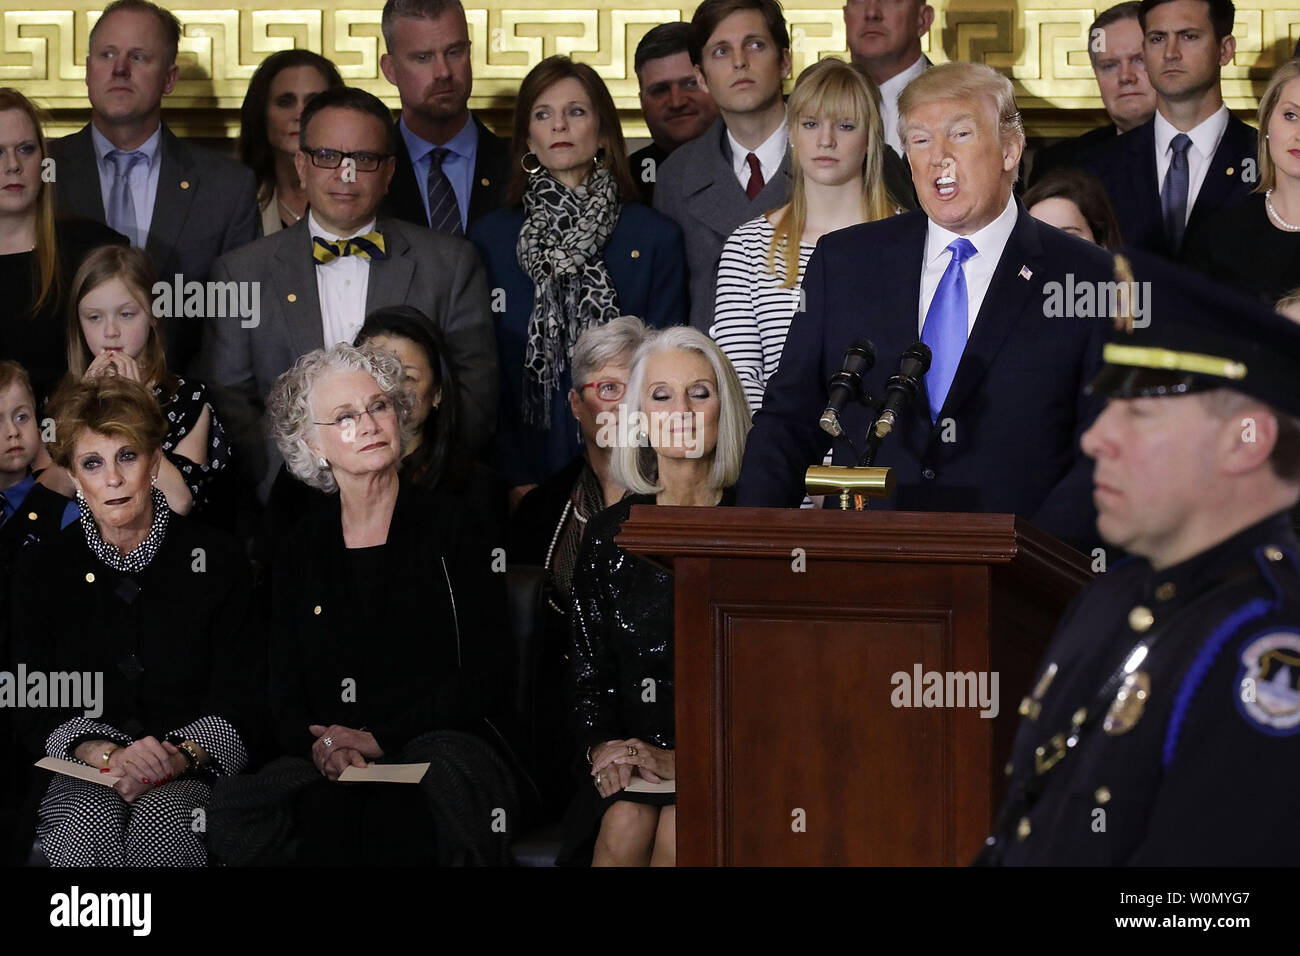 U.S. President Donald Trump (R) delivers remarks during a memorial ceremony for Christian evangelist and Southern Baptist minister Billy Graham as his daughters (L-E) Gigi Graham, Ruth Graham and Anne Graham Lotz listen in honor in the U.S. Capitol Rotunda February 28, 2018 in Washington, DC. A spiritual counselor for every president from Harry Truman to Barack Obama and other world leaders for more than 60 years, Graham died February 21 at the age of 99.  Photo by Chip Somodevilla/UPI Stock Photo